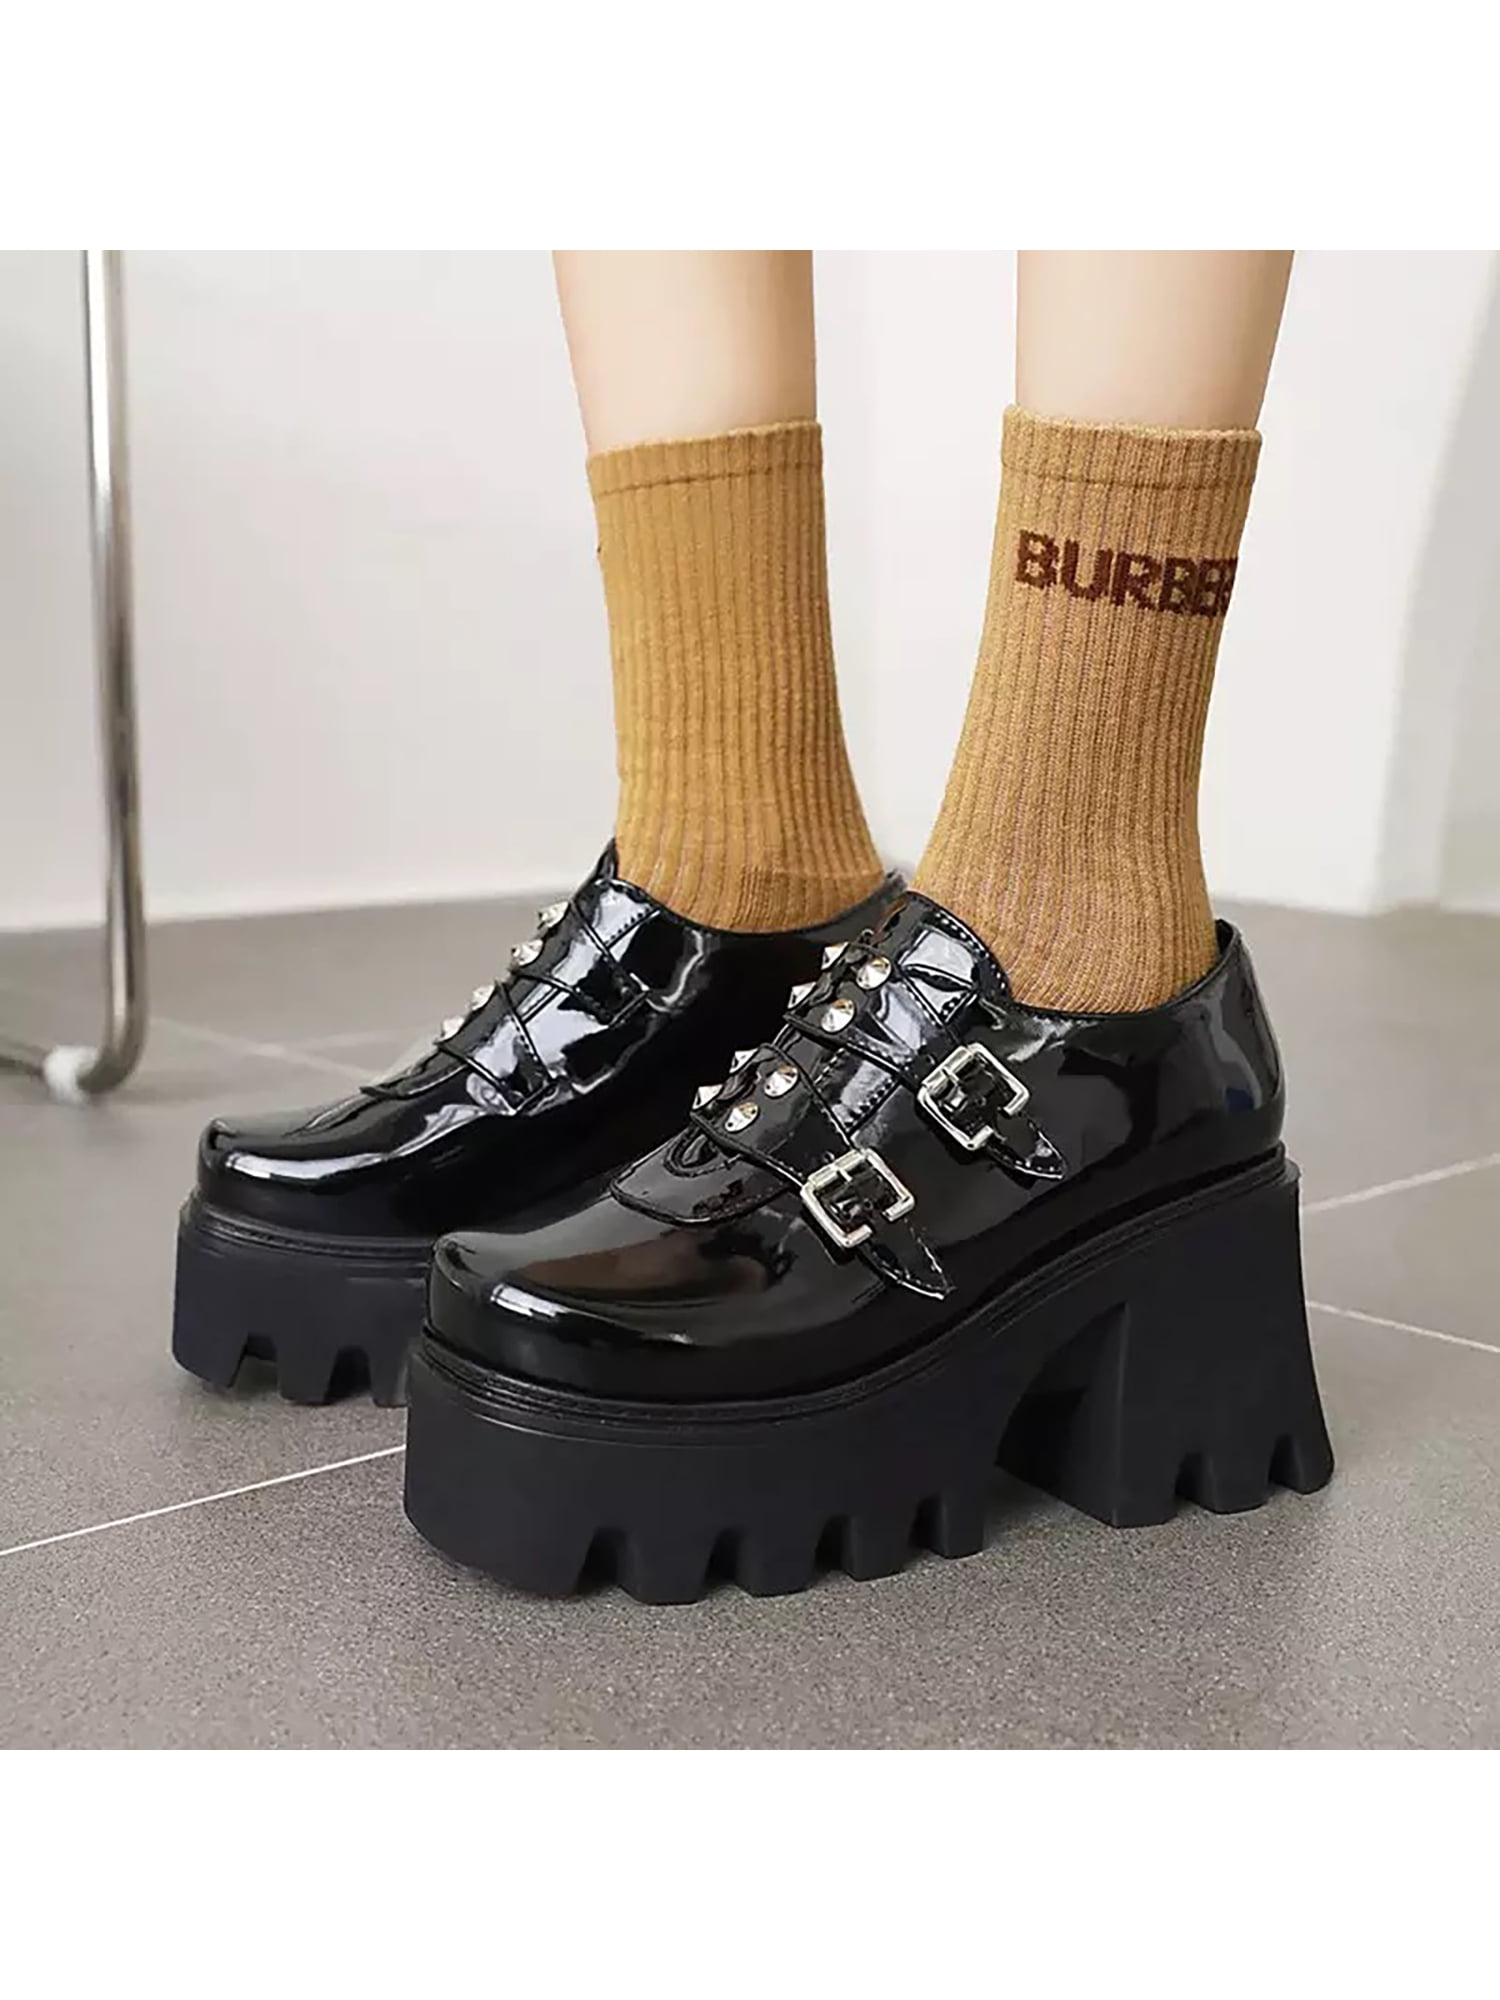 Business Lace Up Mens Leather Shoes Platform Creepers Dress Formal Leisure Pumps